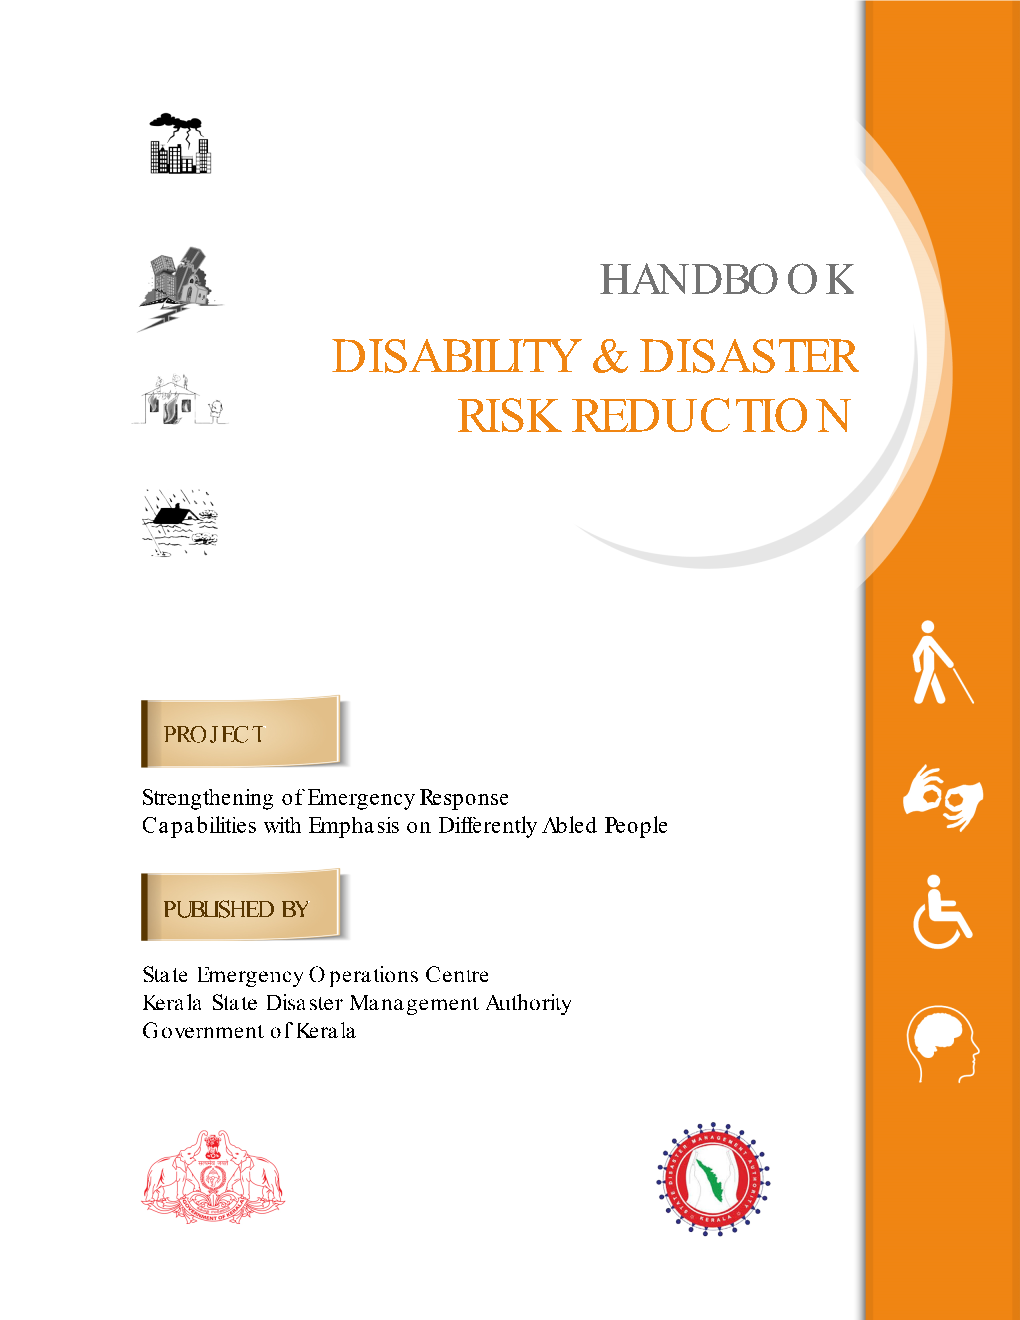 Disability and Also After Discussing with Persons with Disabilities